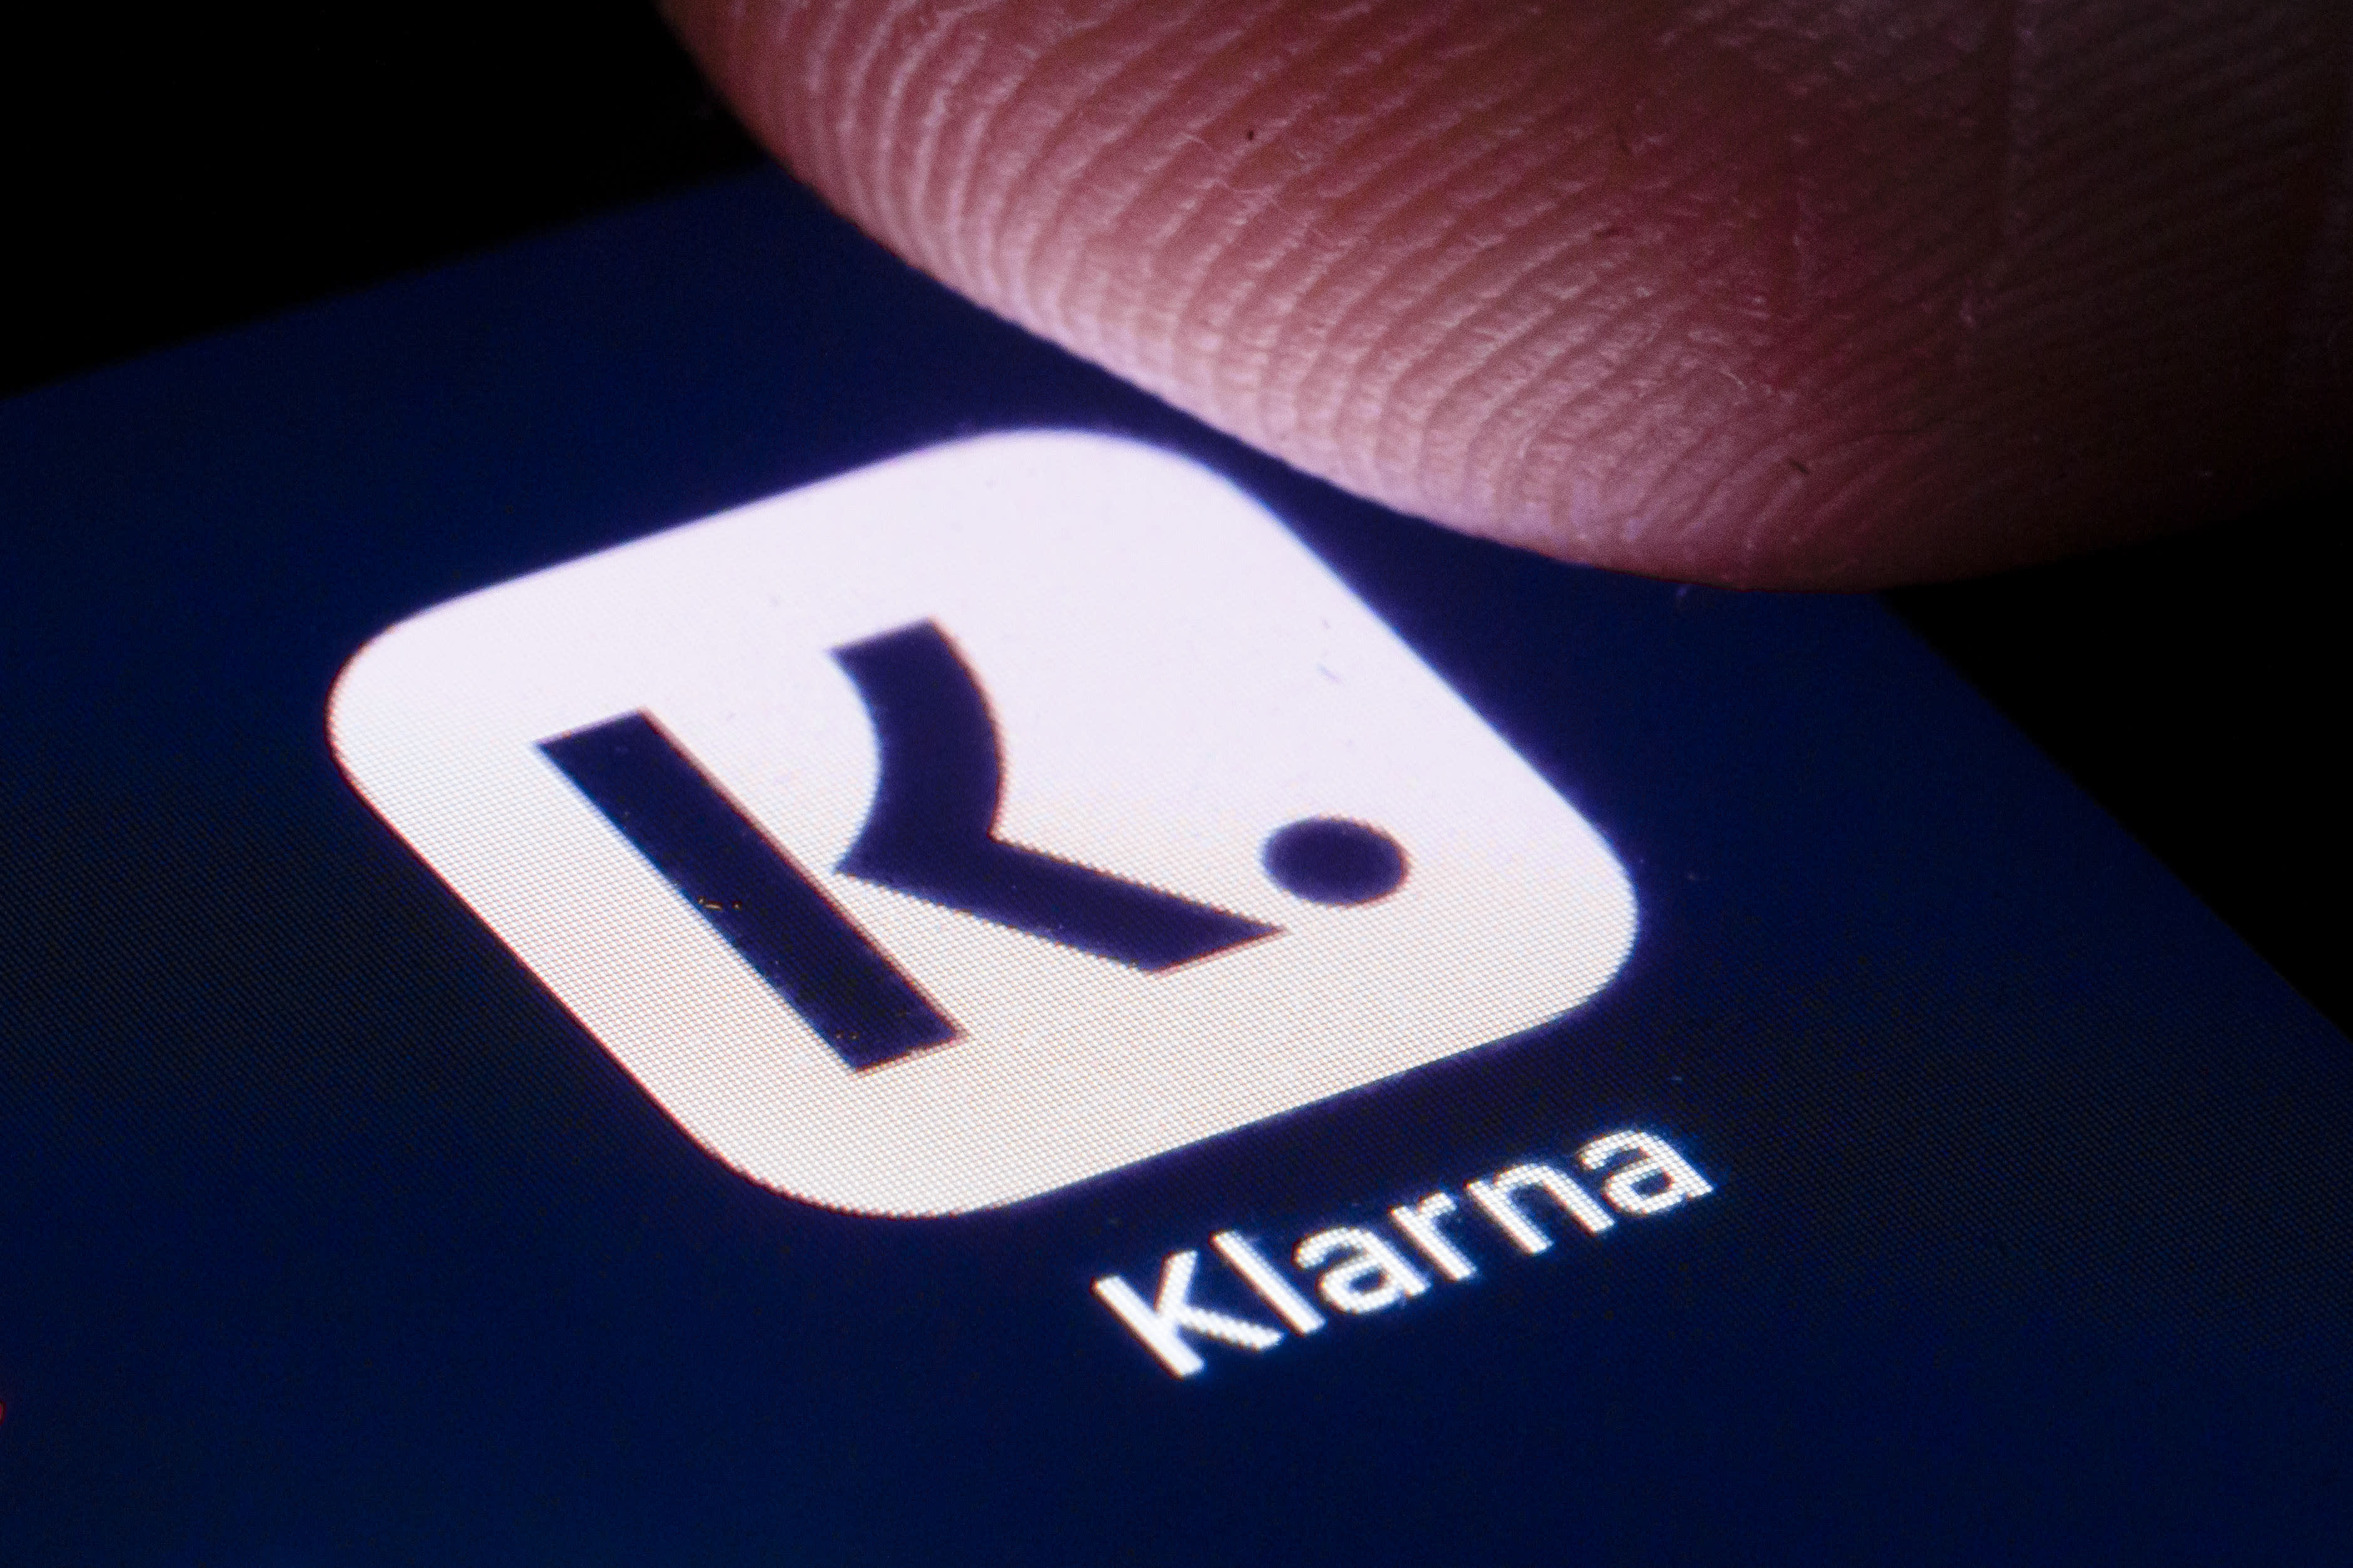 UK will regulate buy pay later (BNPL) companies like Klarna and Clearpay